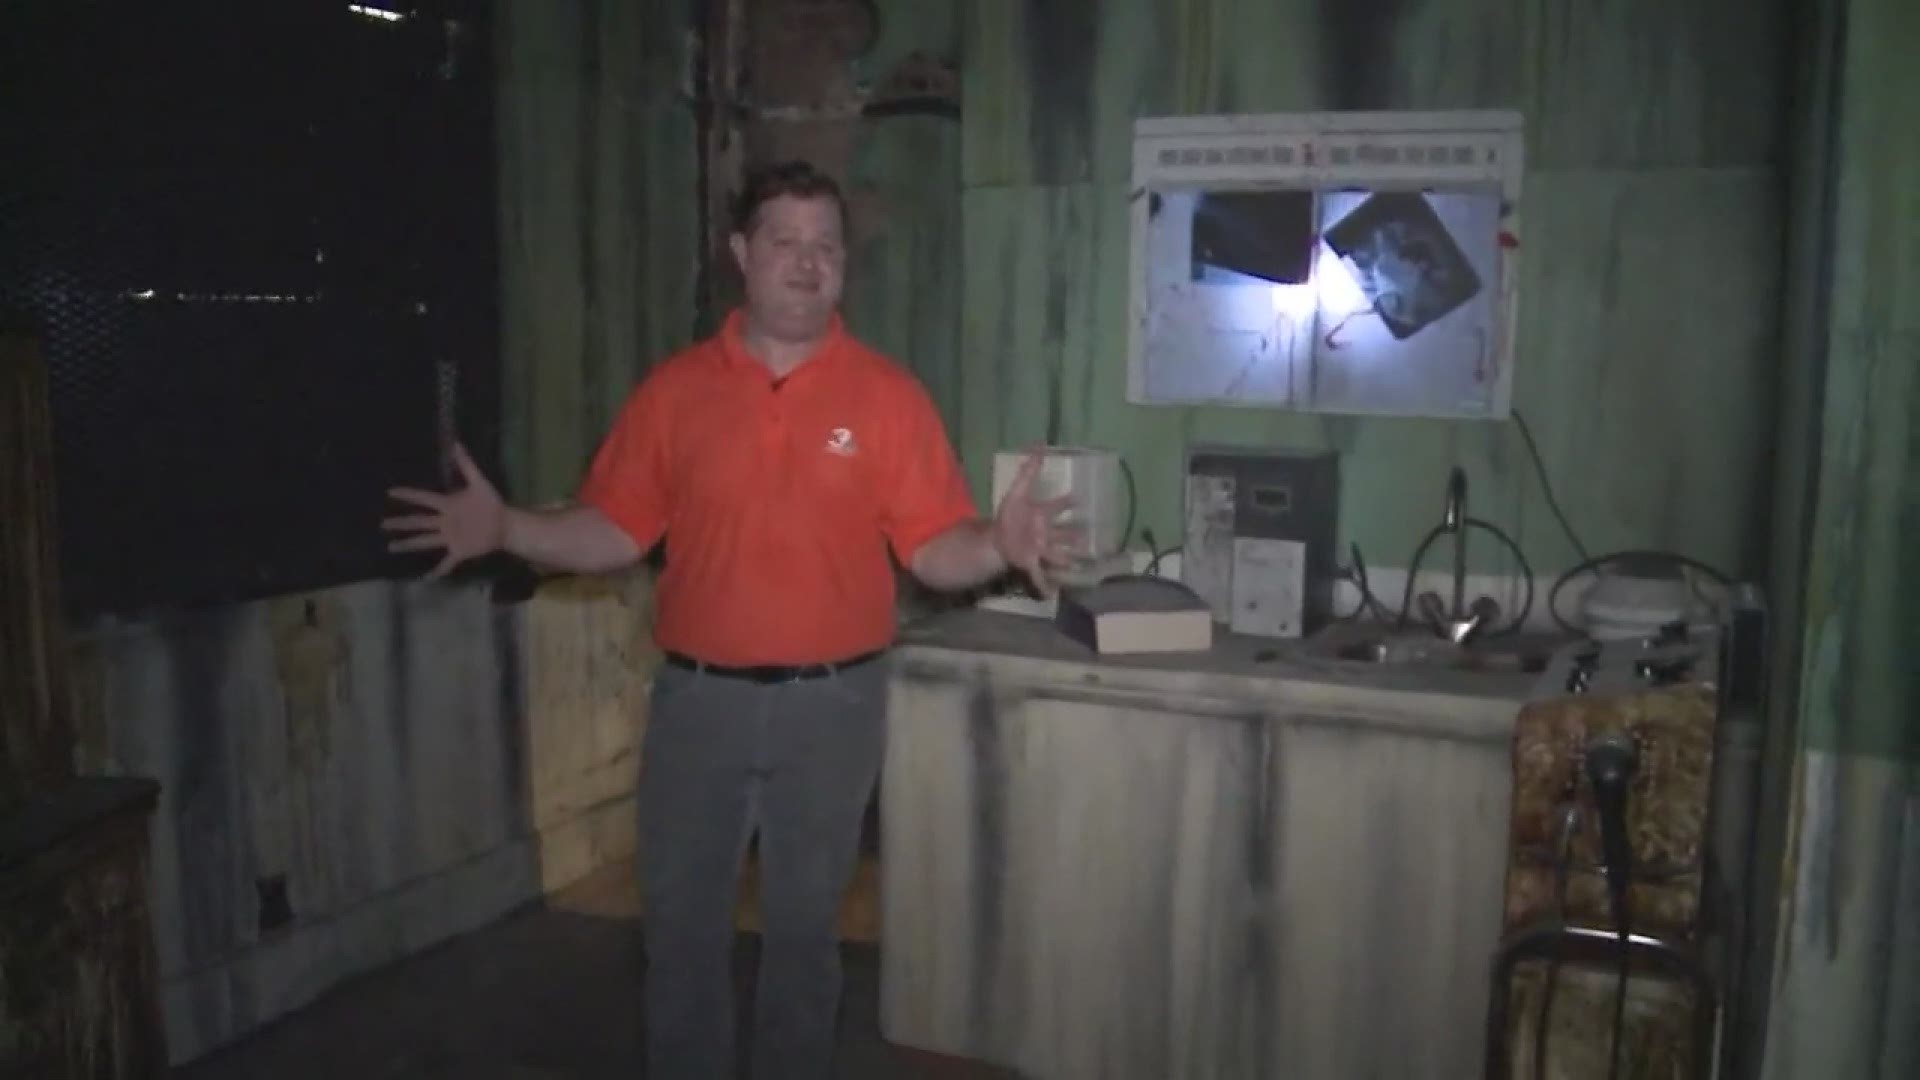 Creepy. Twisted. Bloody. That's what awaits you inside the 2nd floor of the four-floor Haunted Laboratory in Akron, Ohio. WKYC's Eric Sever took a gory tour through the morgue scenes -- and his screams are hysterical. The Laboratory opened in 1981 next do